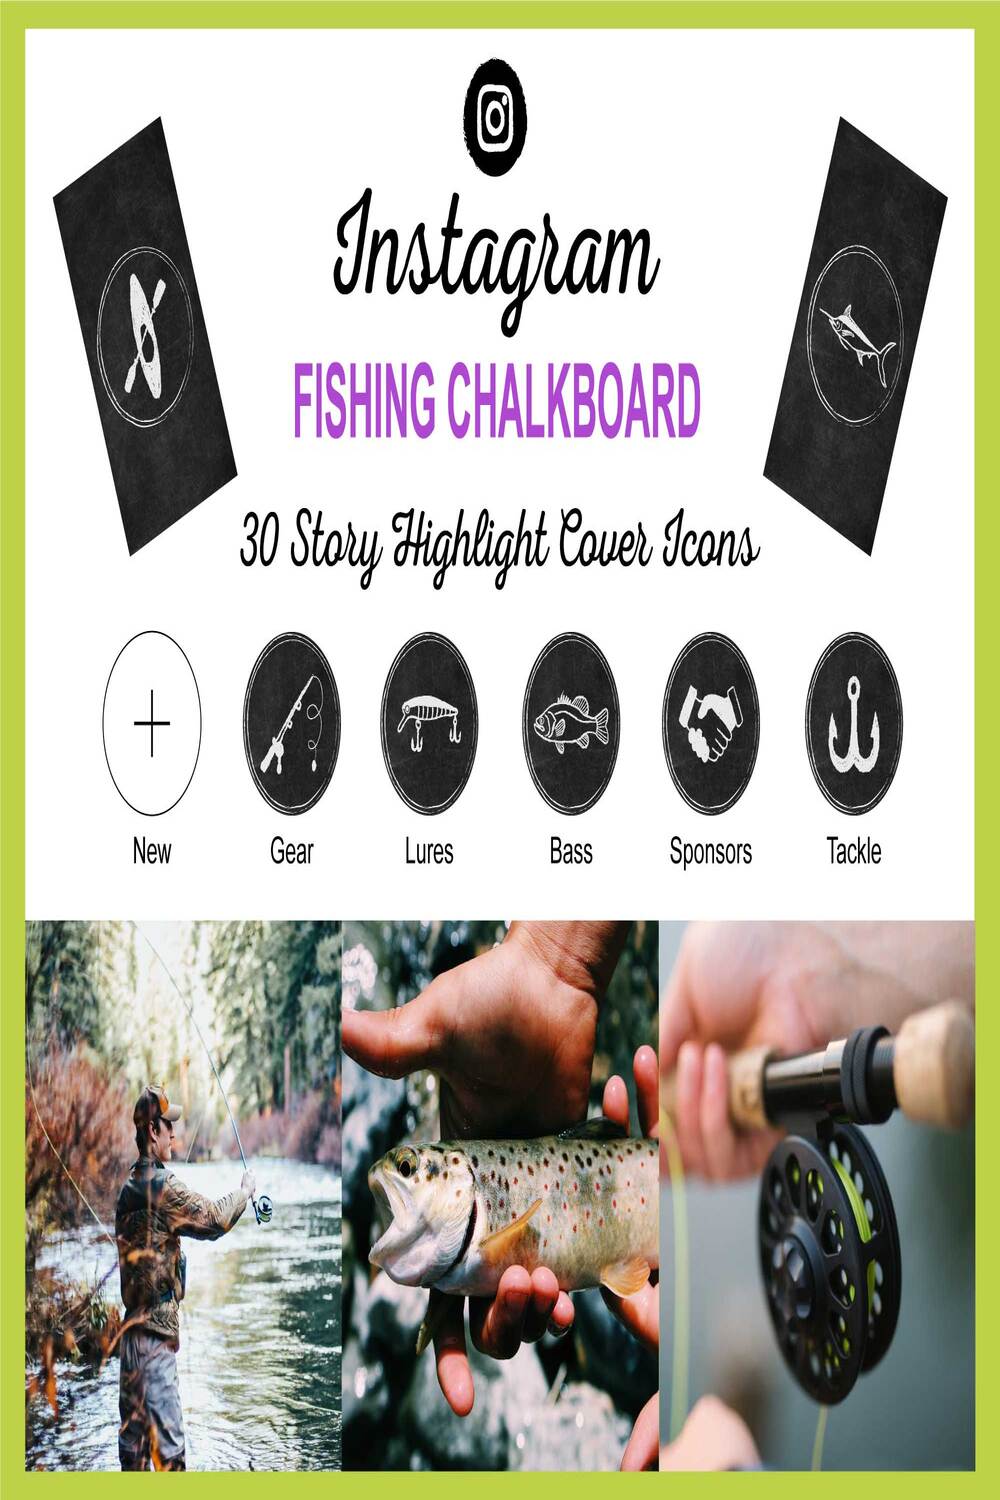 Instagram Fishing ChalkBoard (35 Story Highlight Covers Icons) pinterest image.